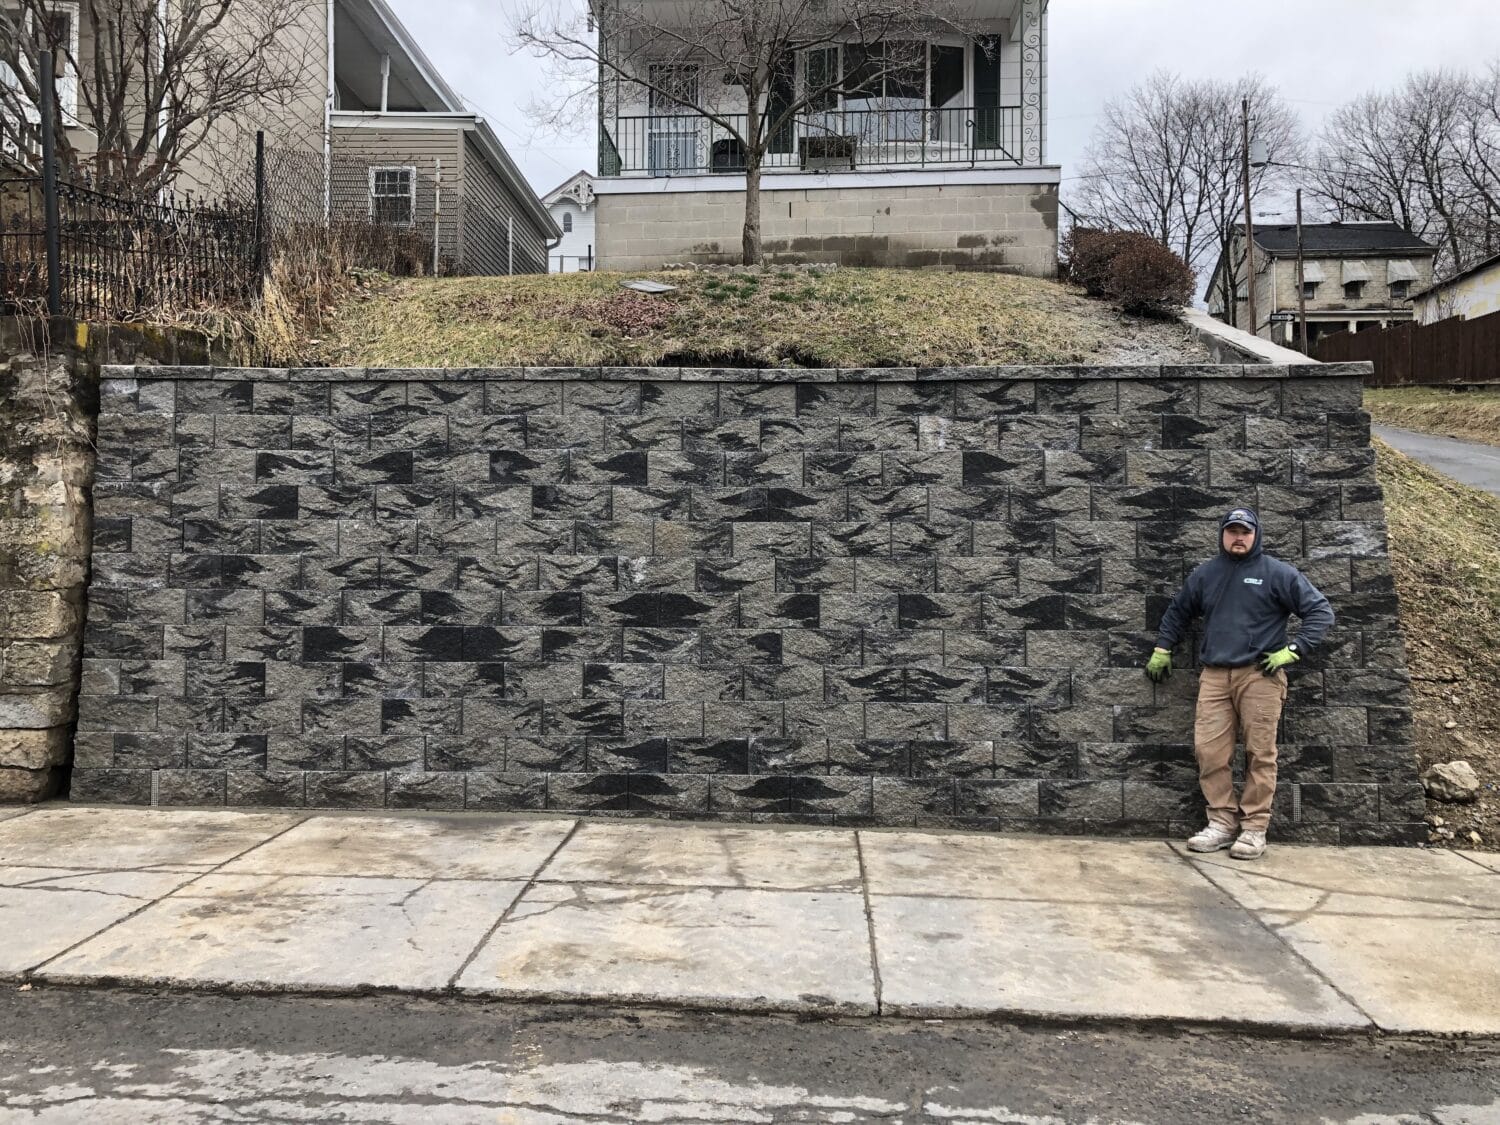 New large retaining wall in front of house on hill